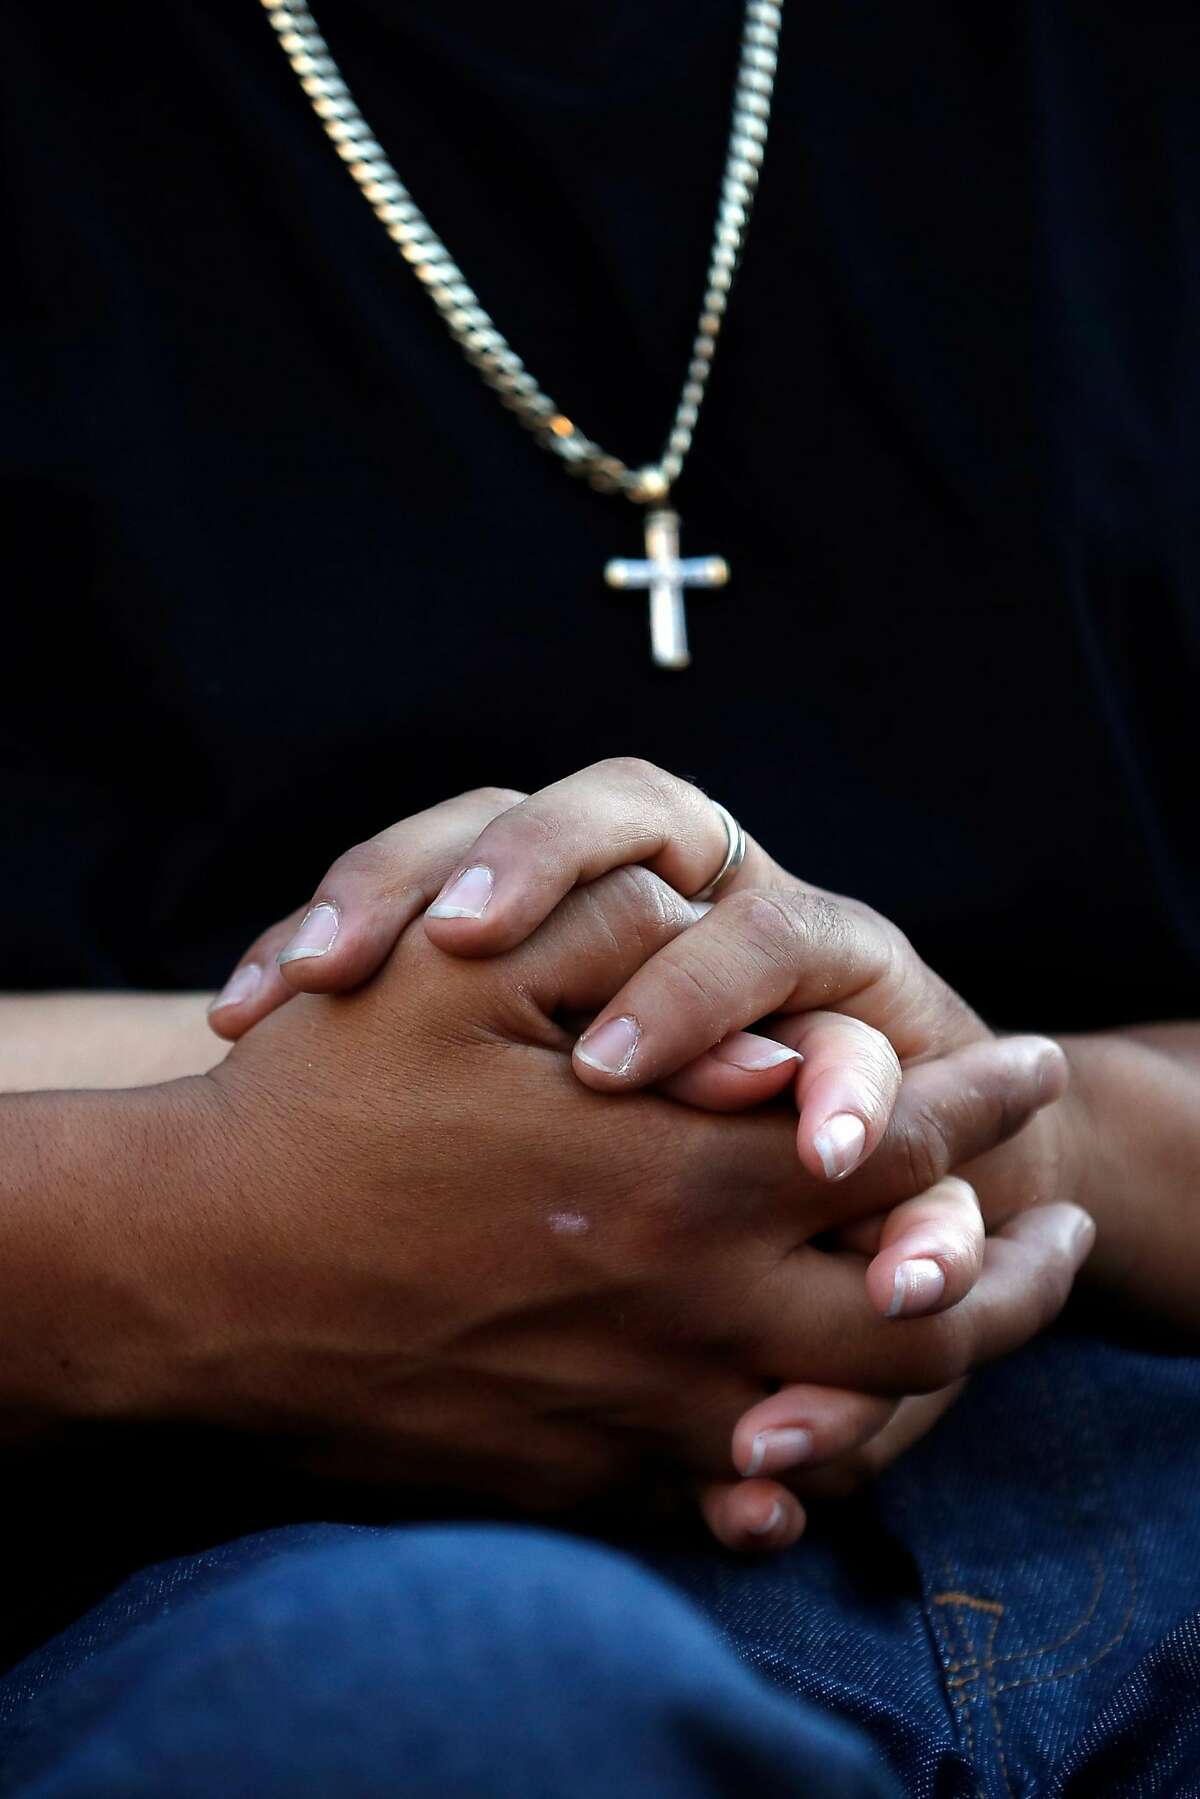 In the wake of Sunday's mass shooting at the Gilroy Garlic Festival, a couple, who declined to be identified, hold hands during a vigil on Monterey Street in Gilroy, Calif., on Thursday, August 1, 2019.